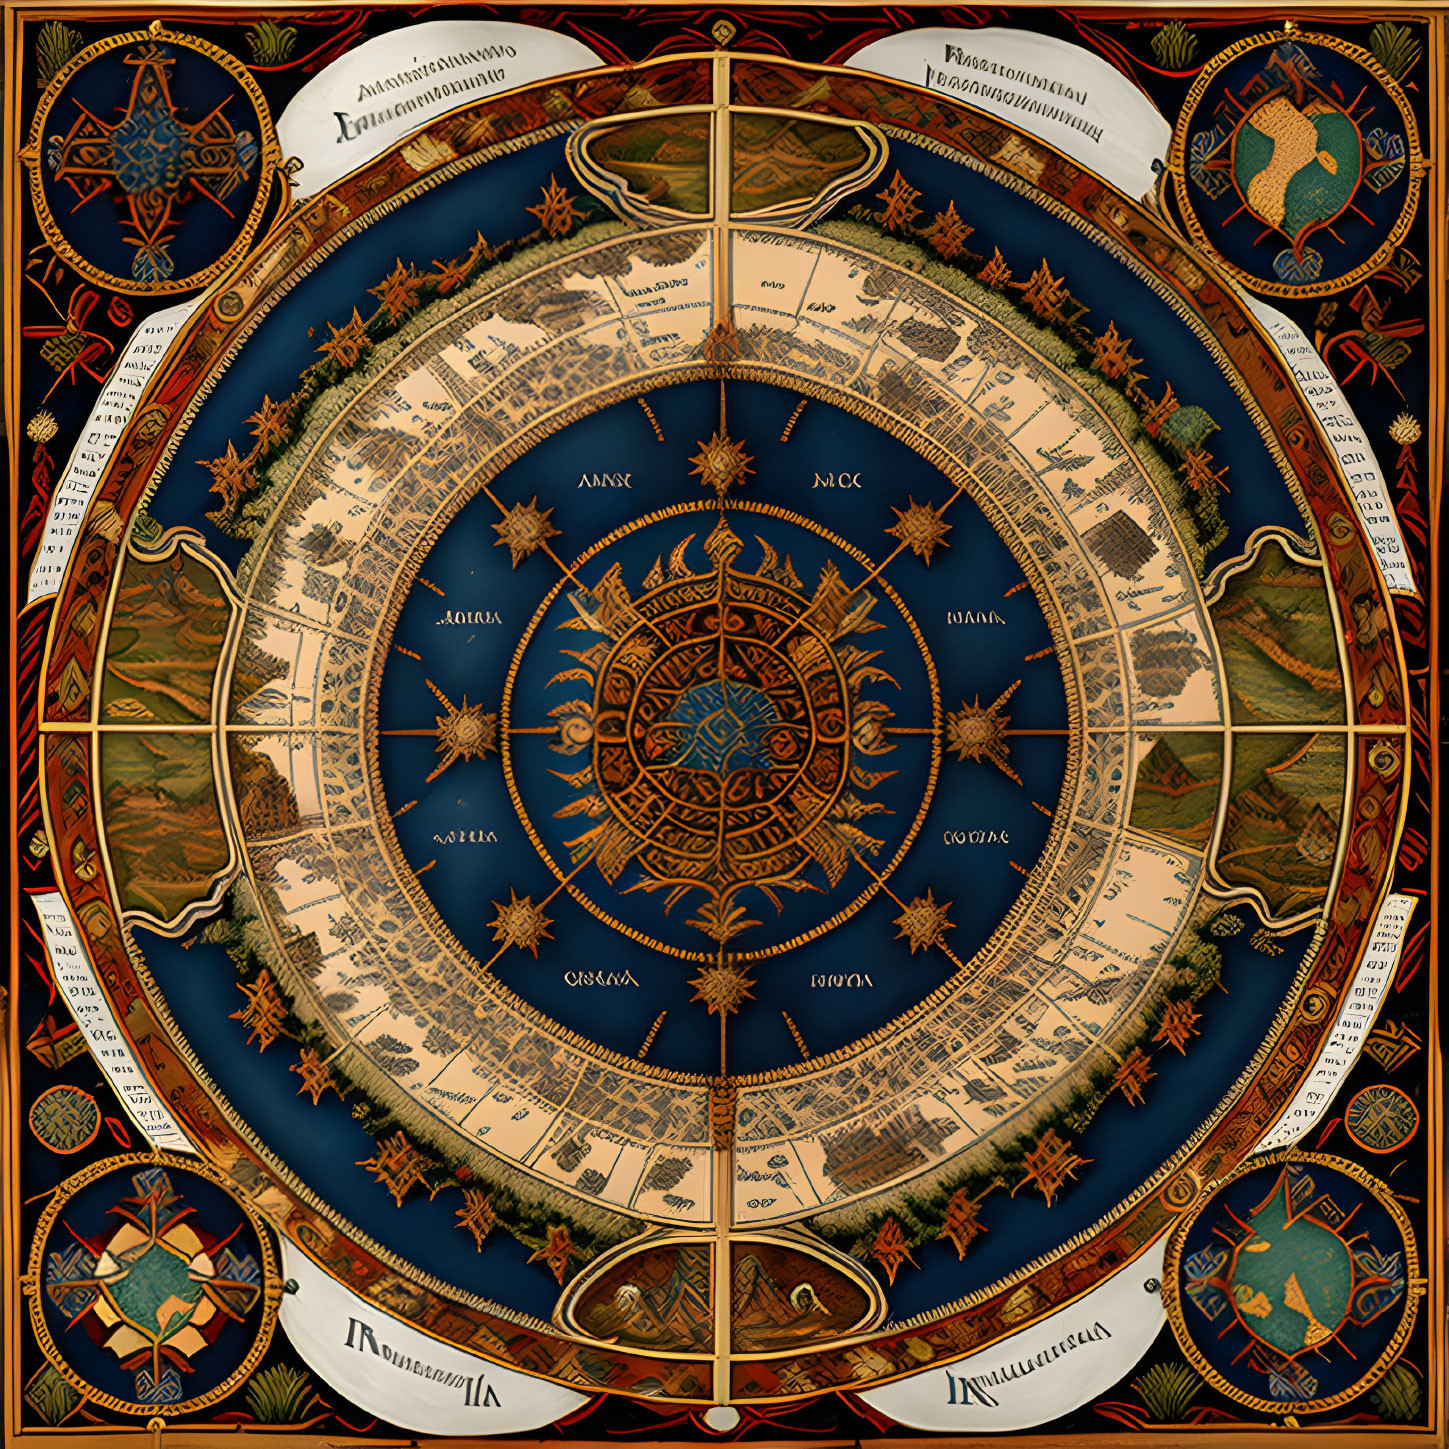 Detailed Astrological Chart with Zodiac Signs and Celestial Symbols